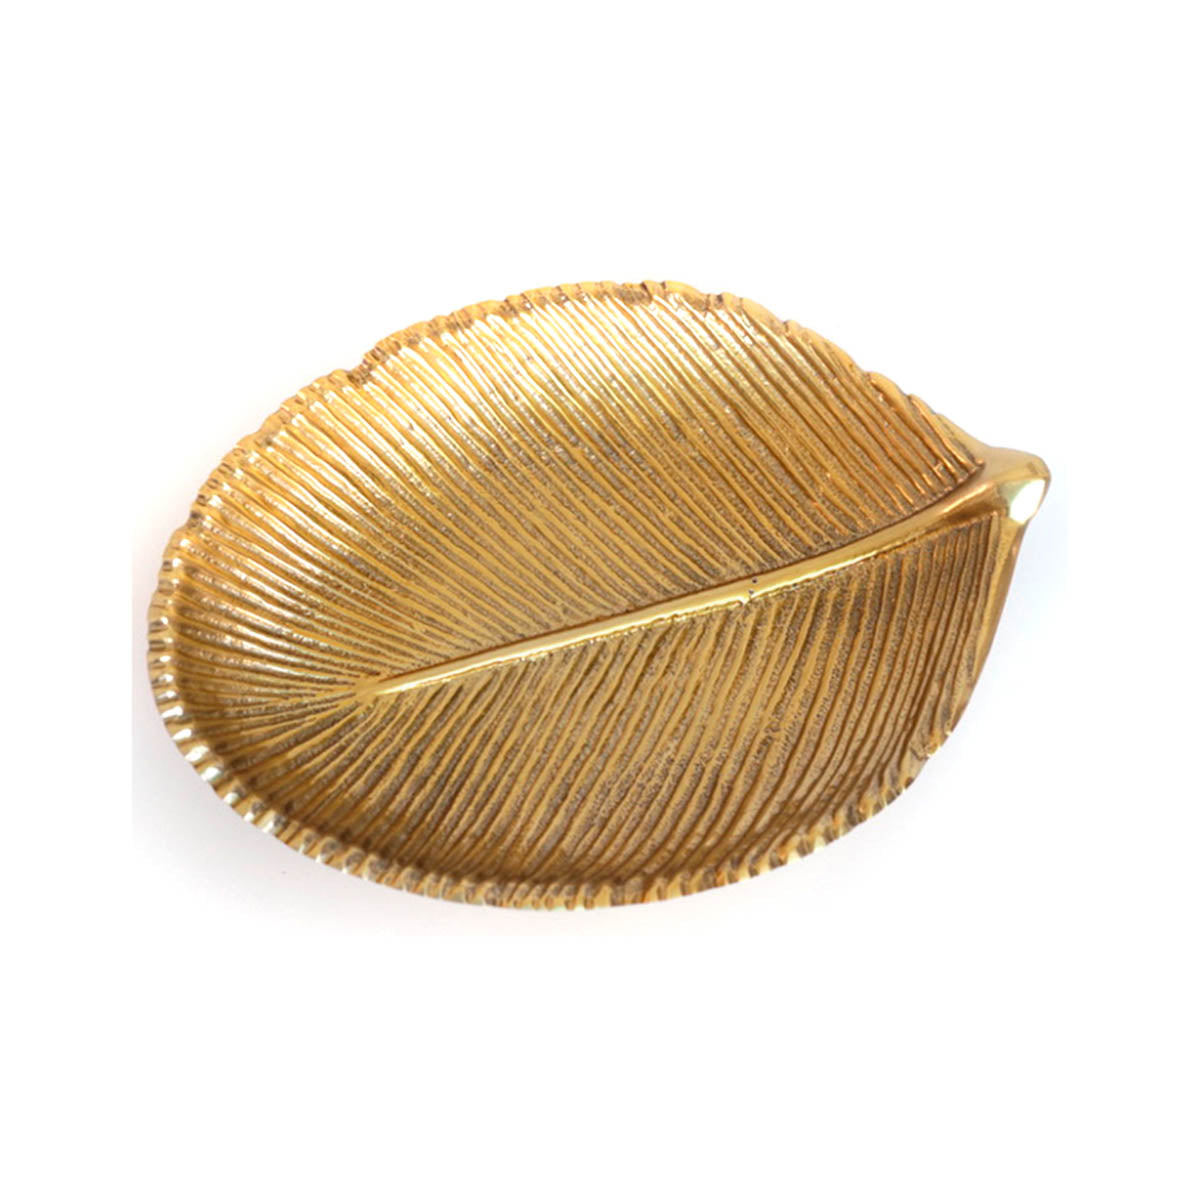 Leaf tray for decoration, Gold 